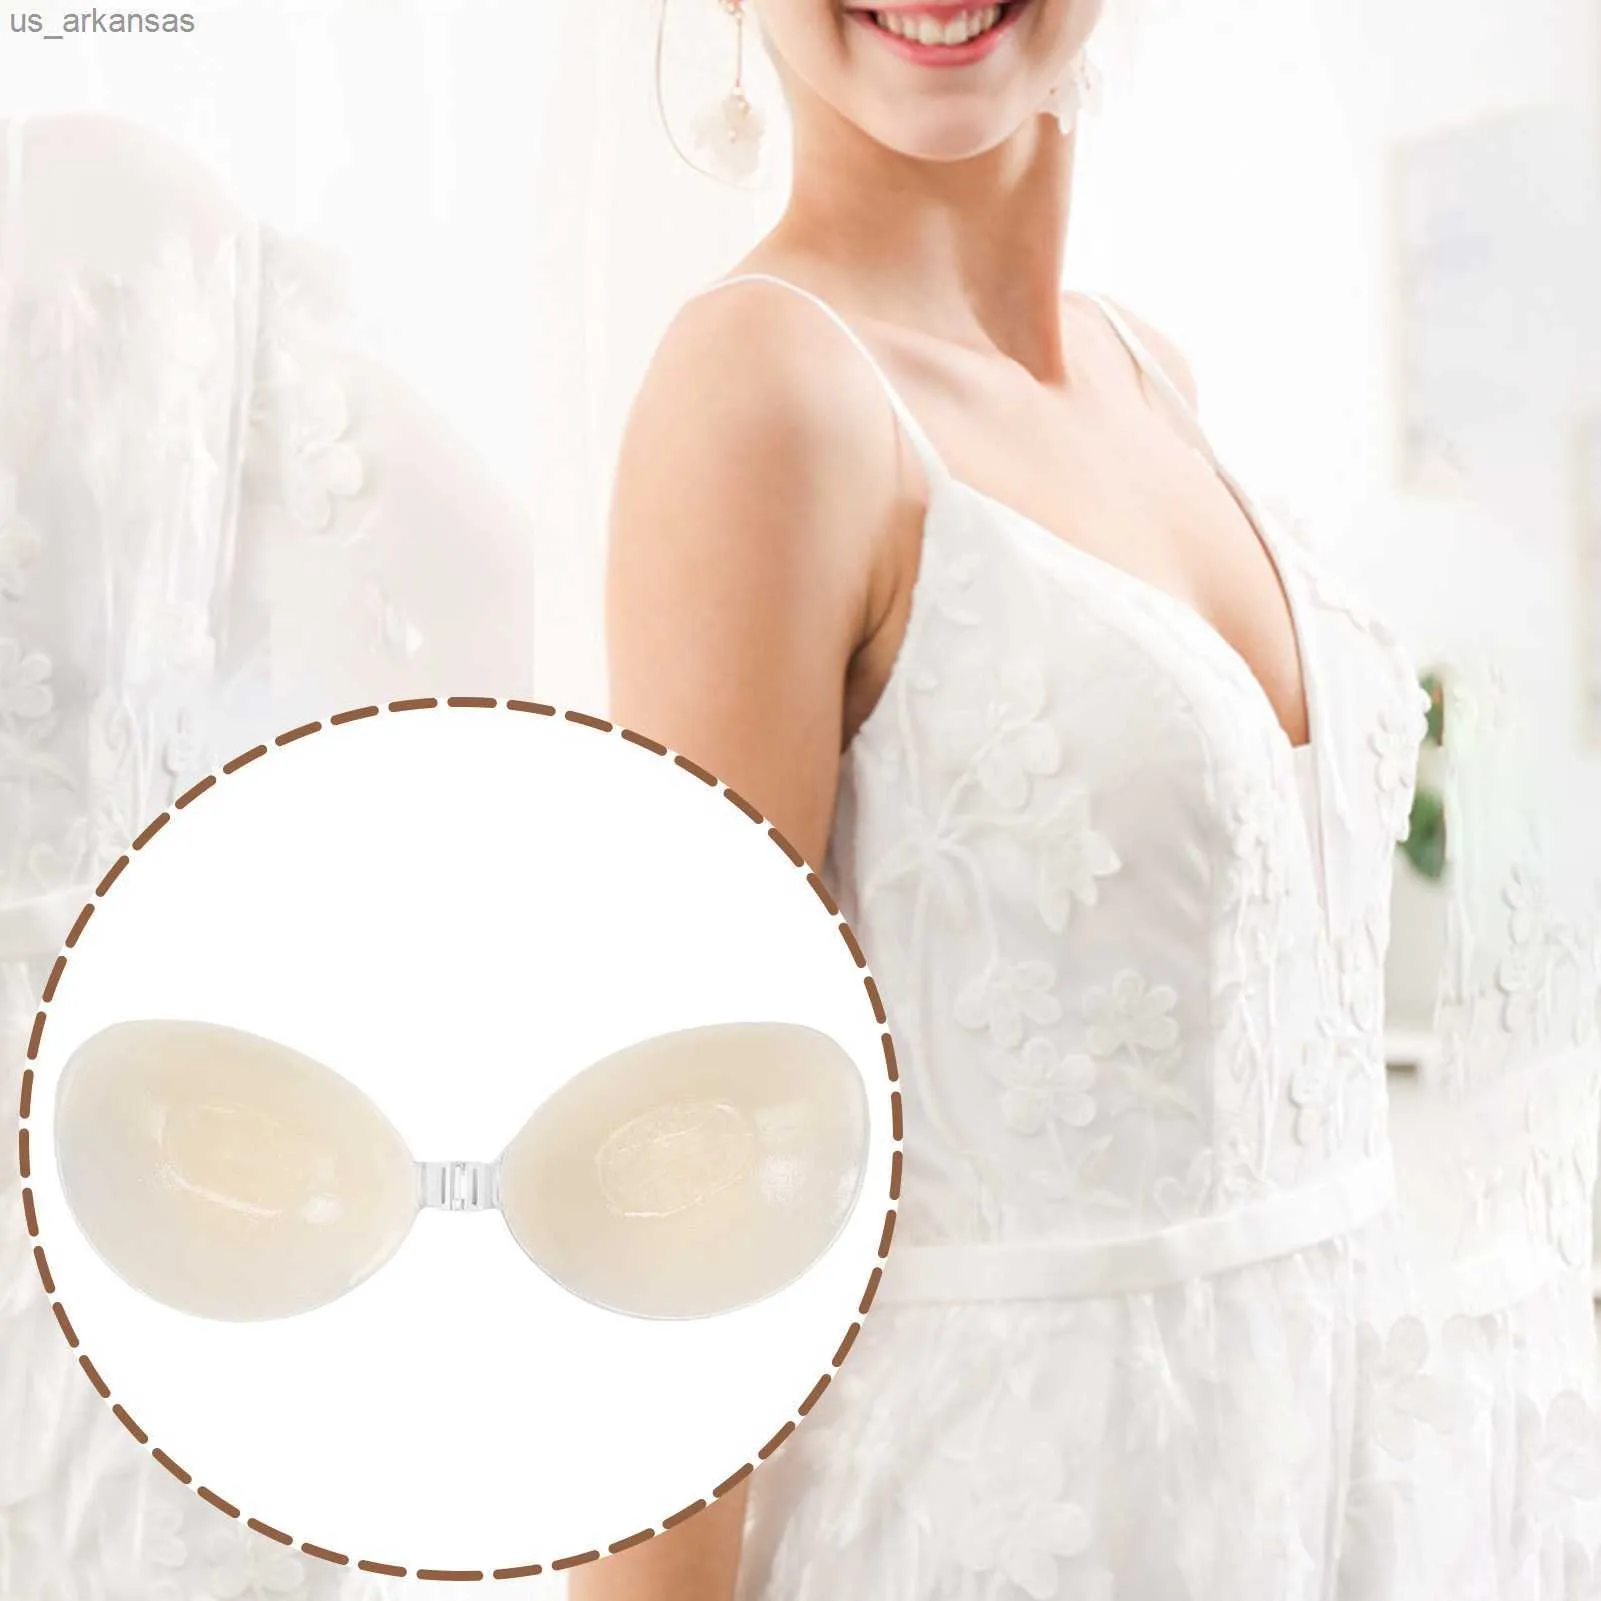 Nipple Cover Breast Pasties Adhesive Bra Instant Breast Lift Silicone  Covers Skin Color Nipple Pads For All Women NOV99 L230523 From Us_arkansas,  $5.6